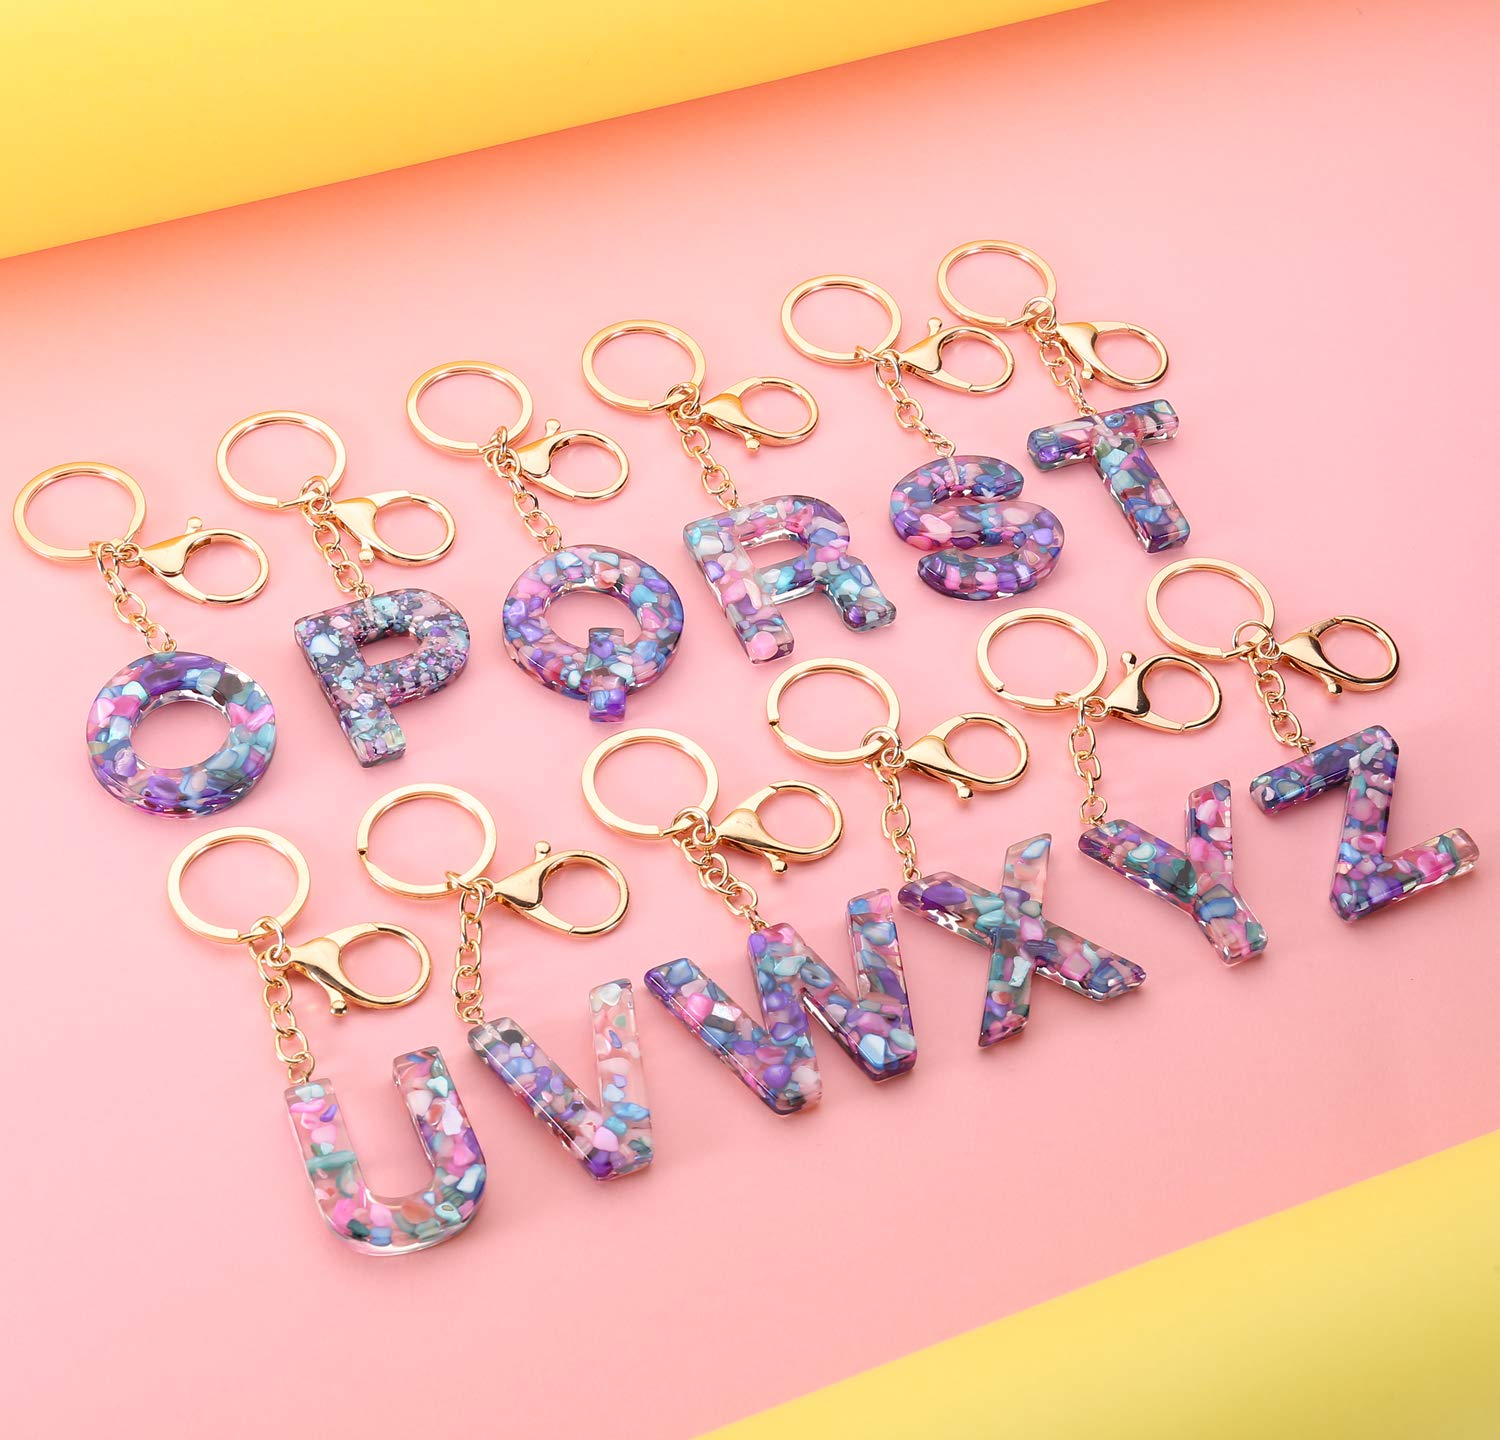 Lenlorry Letter A-Z Keychain Cute Crystals Keyring Initial Key Ring